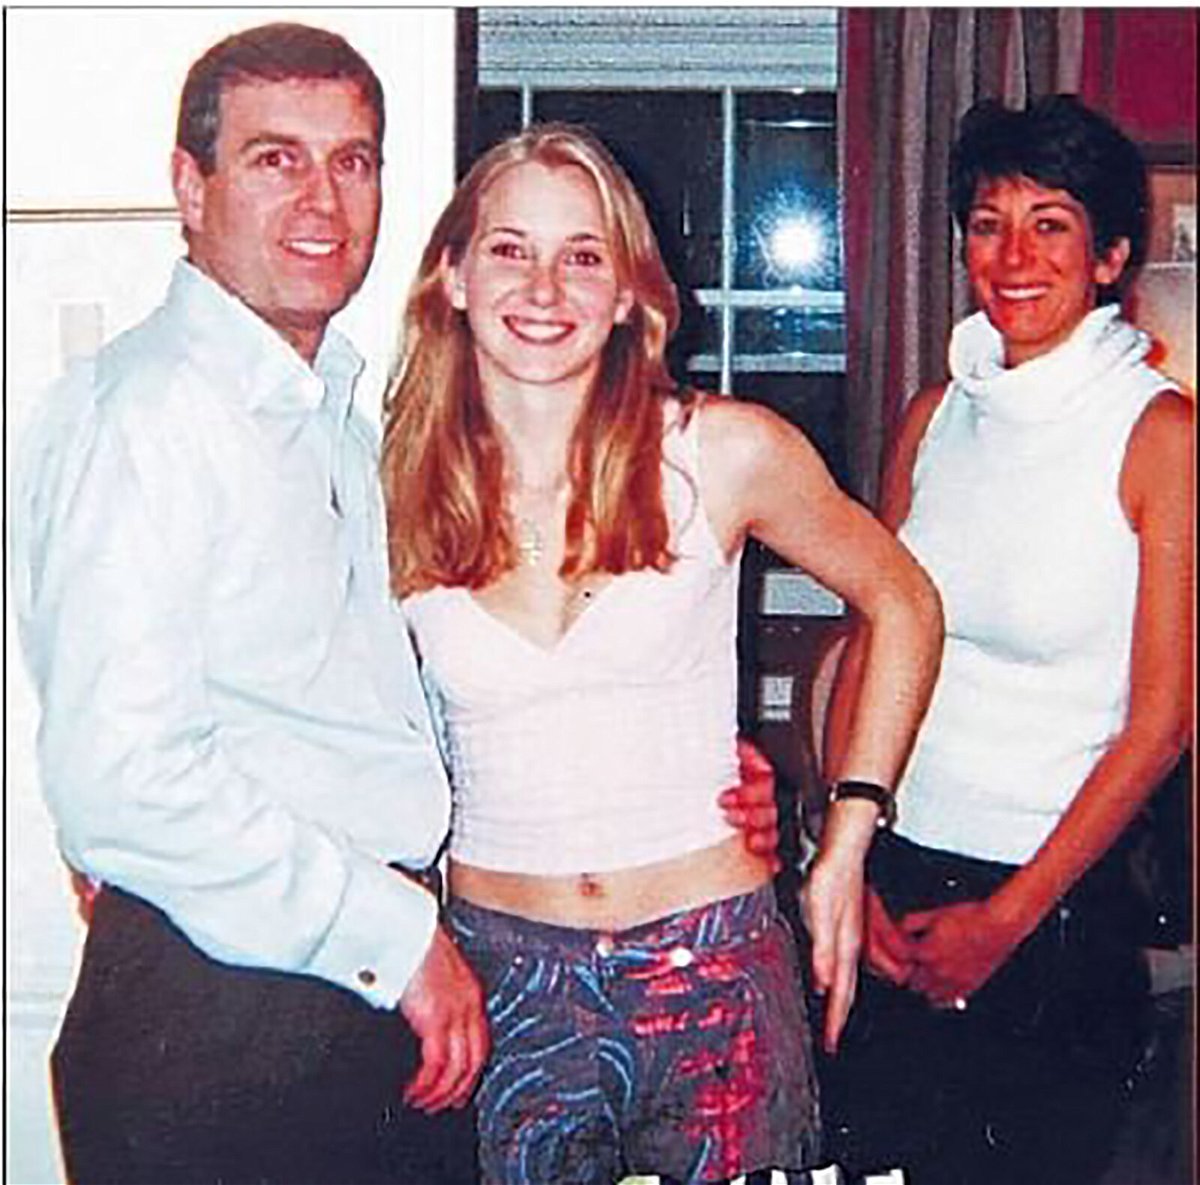 <i>Florida Southern District Court</i><br/>Prince Andrew faces a pre-trial conference in his sexual abuse case with Virginia Roberts Giuffre on November 3. A photograph appearing to show Prince Andrew (left)